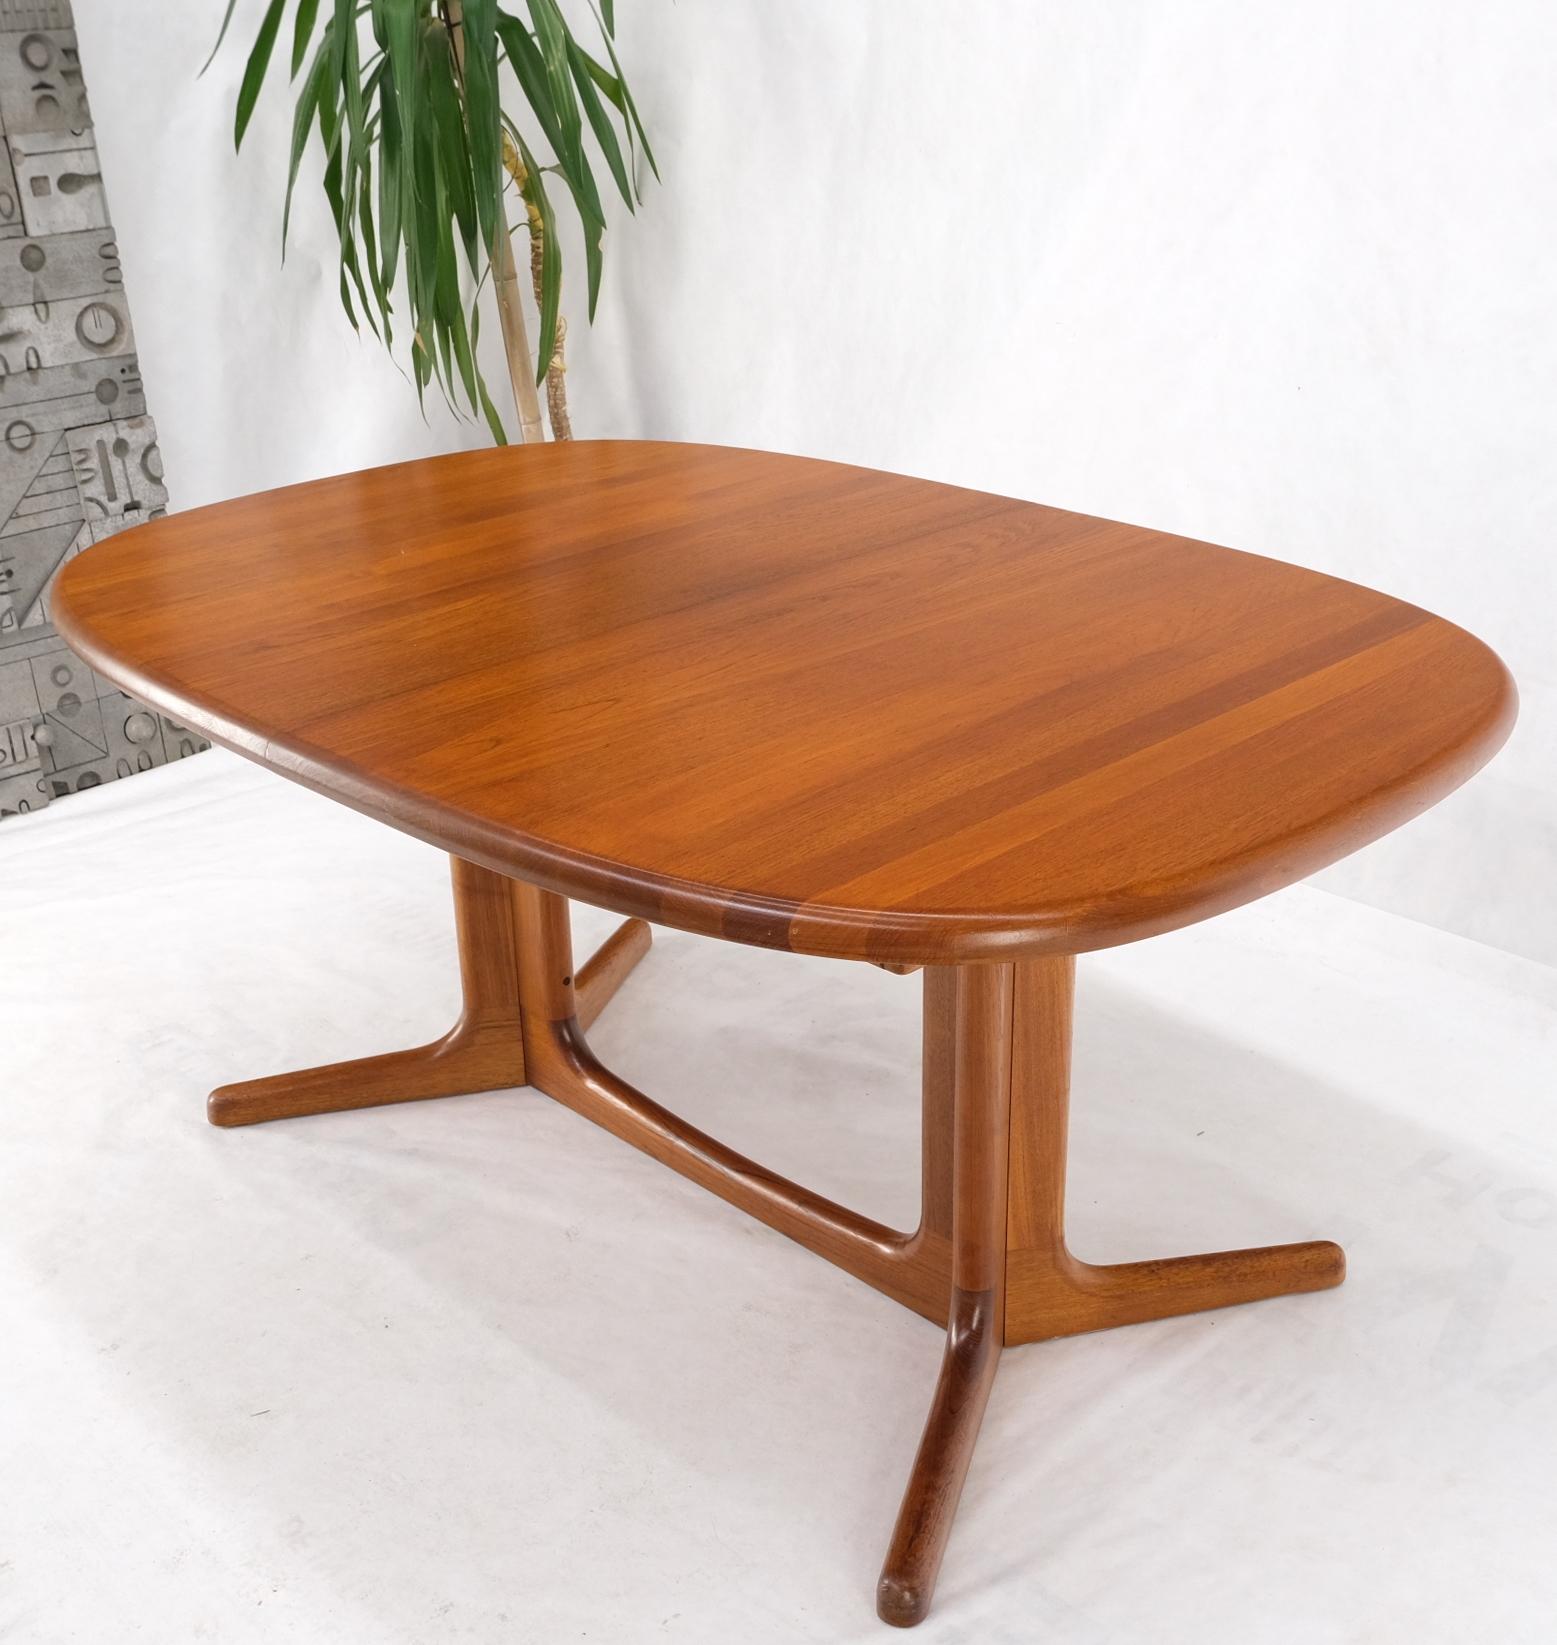 20th Century Solid Teak Oval Danish Mid Century Dining Conference Table 2 Extension Leaves